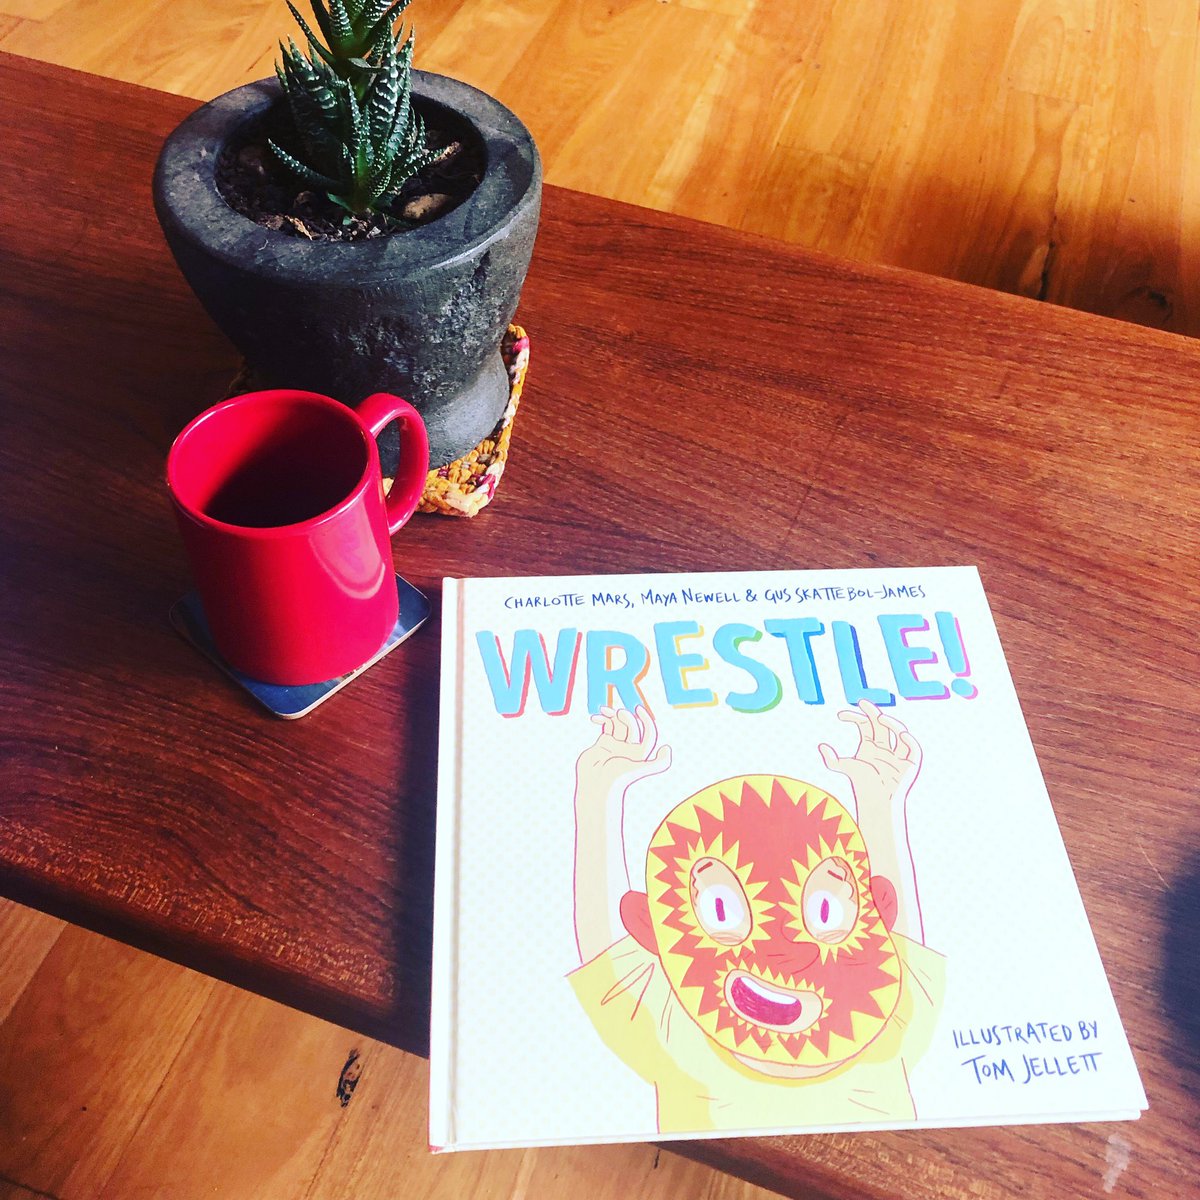 Stoked to receive a copy of #Wrestle, by Gus Skattebol-James, Maya Newell & Charlotte Mars. Inspired by @gaybybaby this lovely kids book features a #queer family getting ready for #SydneyMardiGras. Buy it for all your friends with kids! @AllenAndUnwin